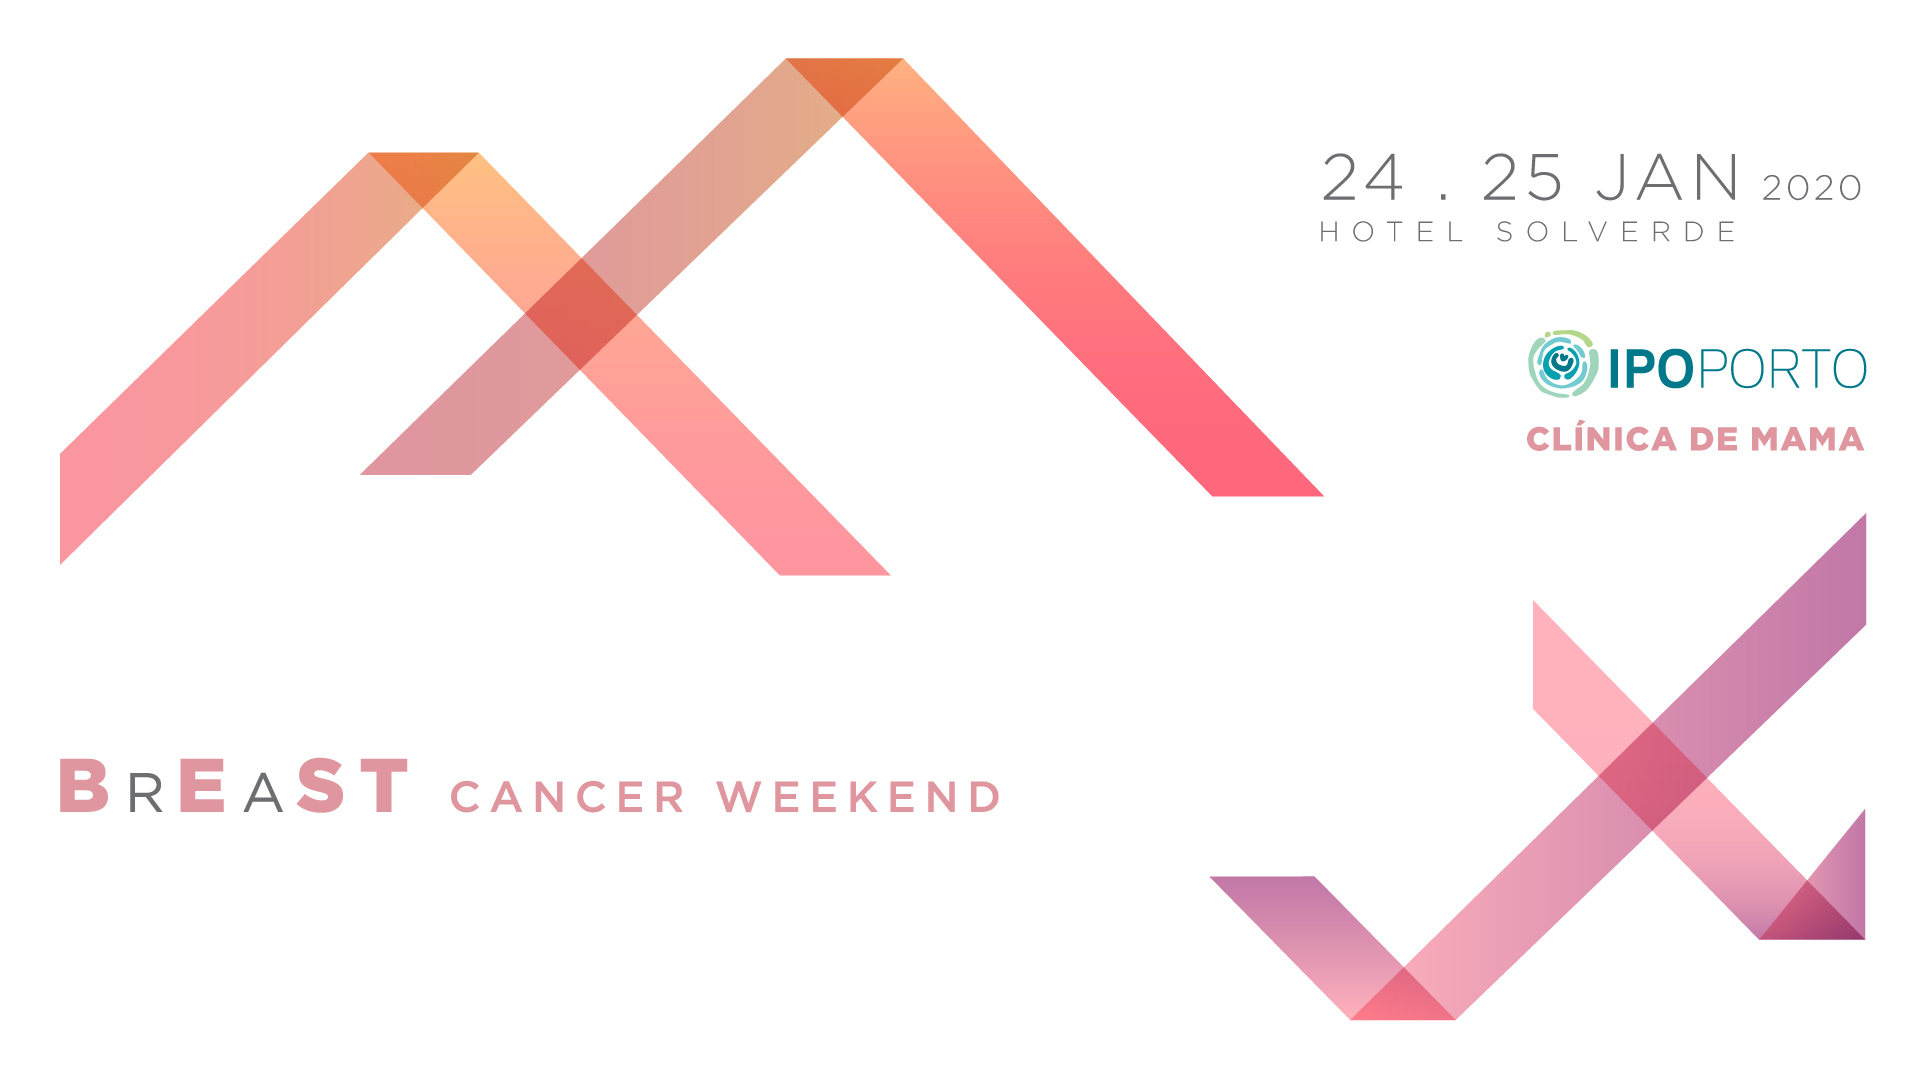 4th BrEaST Cancer Weekend